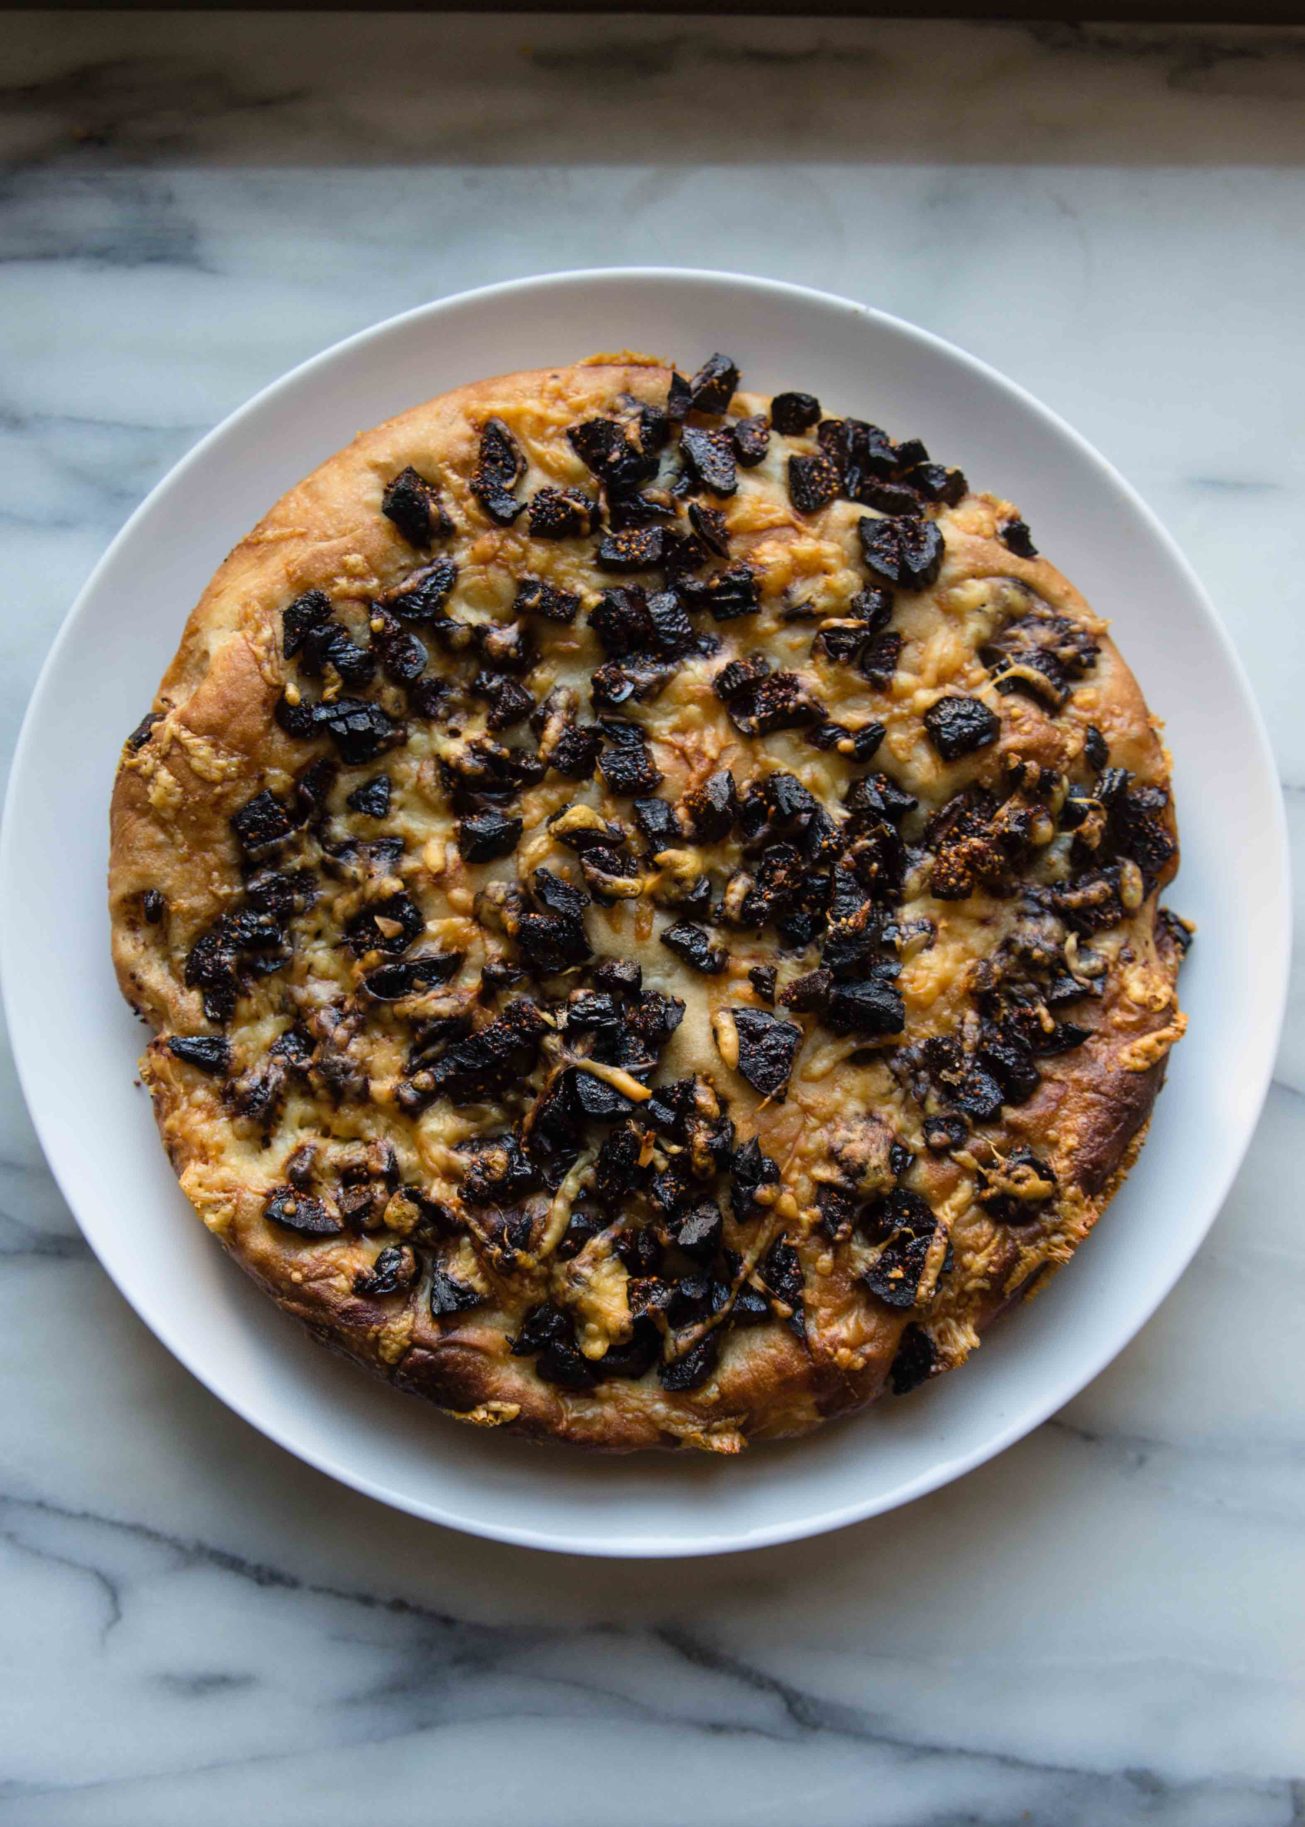 Focaccia recipes bake flatbread to serve in strips as an appetizer or alternative to rolls. Gruyere makes dried fig focaccia perfect for cheese boards.